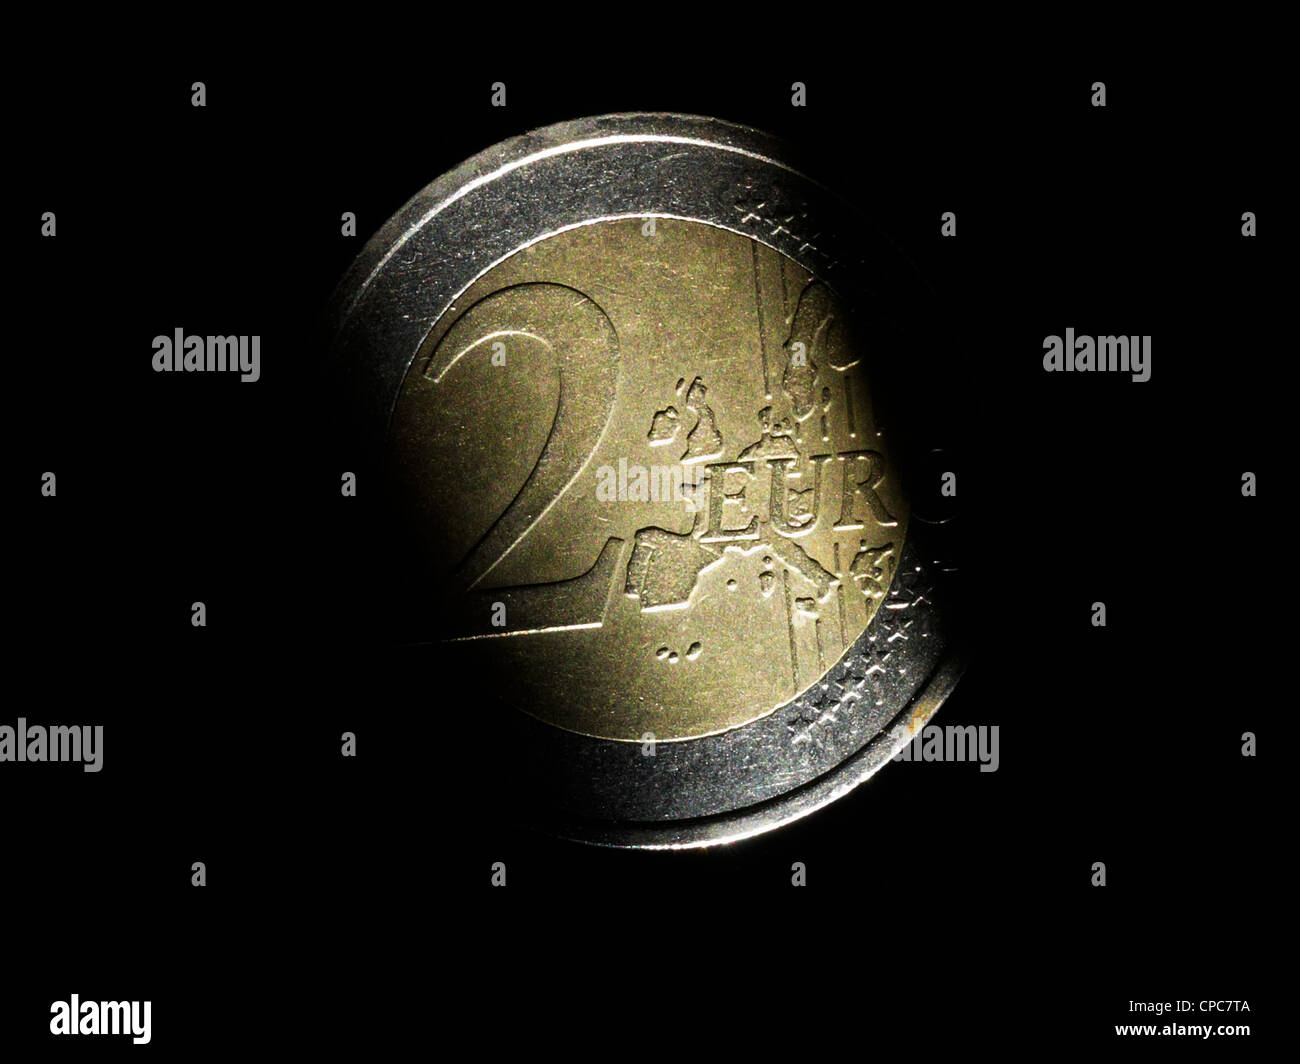 A two Euro Coin from the single European Currency. Stock Photo